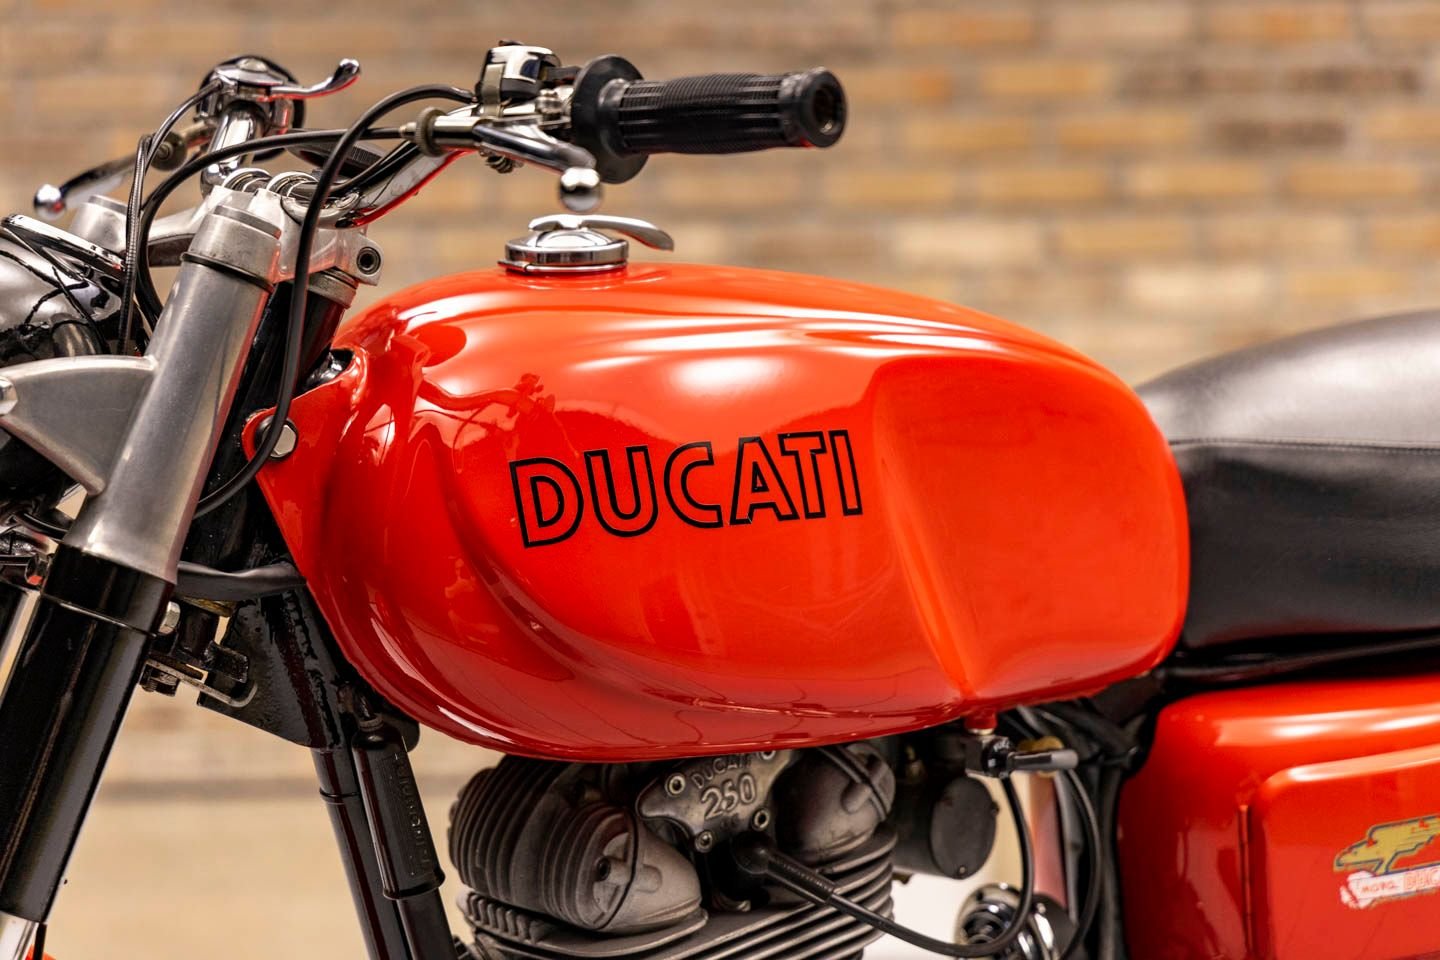 813112 | 1967 Ducati 250 Monza | Throttlestop | Automotive and Motorcycle Consignment Dealer